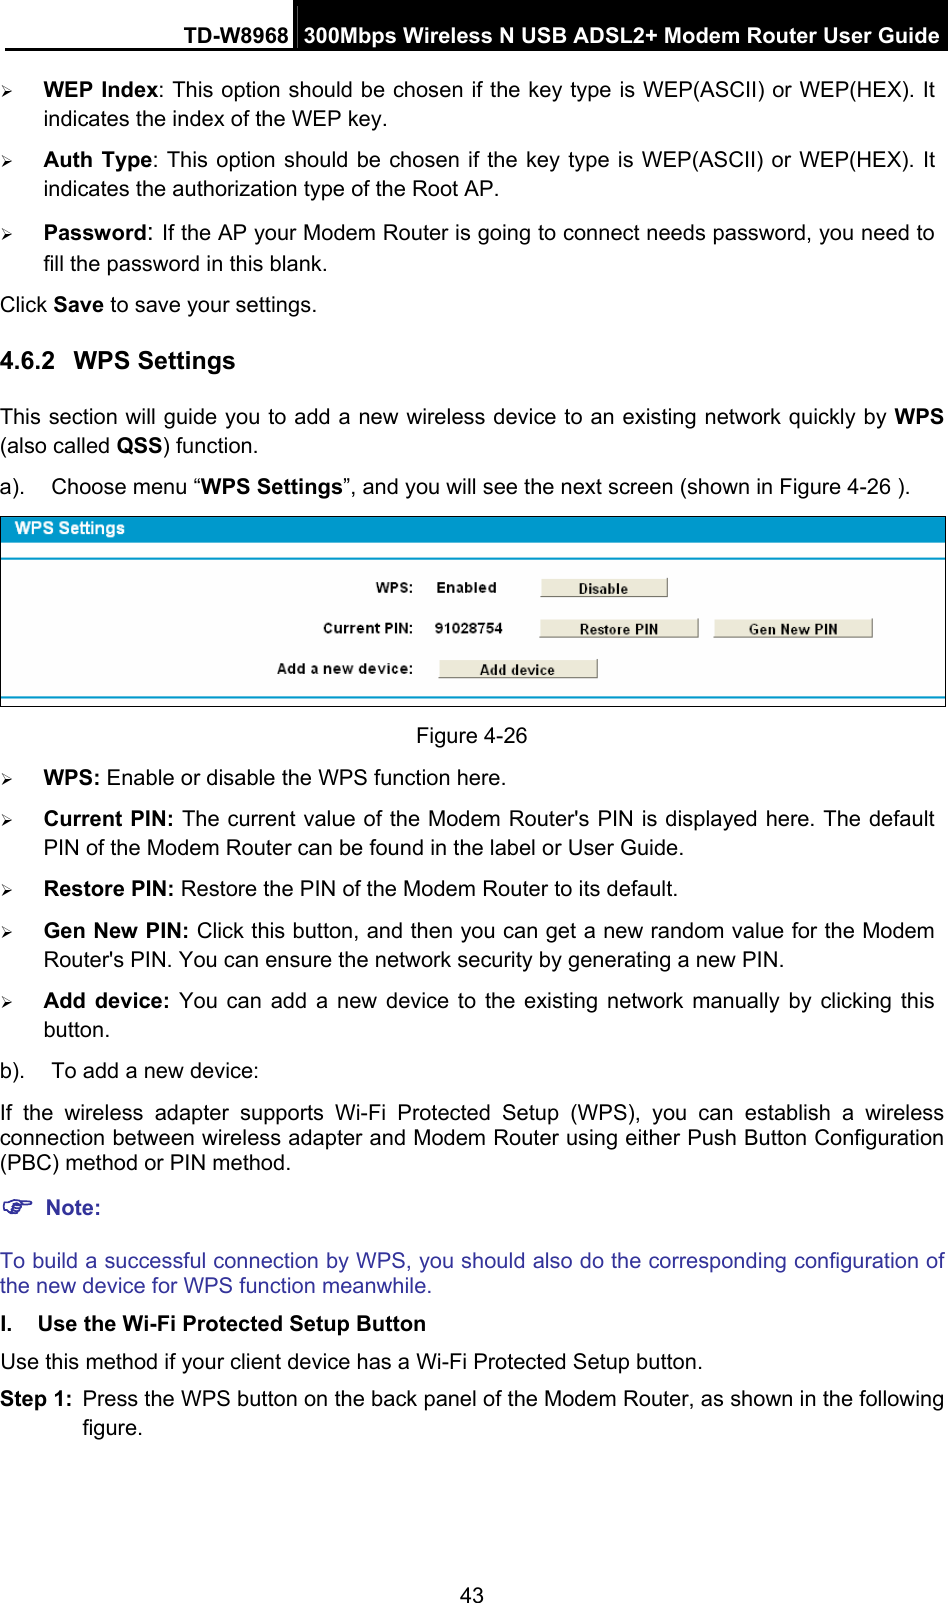 TD-W8968  300Mbps Wireless N USB ADSL2+ Modem Router User Guide 43 ¾ WEP Index: This option should be chosen if the key type is WEP(ASCII) or WEP(HEX). It indicates the index of the WEP key. ¾ Auth Type: This option should be chosen if the key type is WEP(ASCII) or WEP(HEX). It indicates the authorization type of the Root AP. ¾ Password: If the AP your Modem Router is going to connect needs password, you need to fill the password in this blank. Click Save to save your settings. 4.6.2  WPS Settings This section will guide you to add a new wireless device to an existing network quickly by WPS (also called QSS) function. a).  Choose menu “WPS Settings”, and you will see the next screen (shown in Figure 4-26 ).    Figure 4-26 ¾ WPS: Enable or disable the WPS function here.   ¾ Current PIN: The current value of the Modem Router&apos;s PIN is displayed here. The default PIN of the Modem Router can be found in the label or User Guide.   ¾ Restore PIN: Restore the PIN of the Modem Router to its default.   ¾ Gen New PIN: Click this button, and then you can get a new random value for the Modem Router&apos;s PIN. You can ensure the network security by generating a new PIN. ¾ Add device: You can add a new device to the existing network manually by clicking this button. b).  To add a new device: If the wireless adapter supports Wi-Fi Protected Setup (WPS), you can establish a wireless connection between wireless adapter and Modem Router using either Push Button Configuration (PBC) method or PIN method. ) Note: To build a successful connection by WPS, you should also do the corresponding configuration of the new device for WPS function meanwhile. I.  Use the Wi-Fi Protected Setup Button Use this method if your client device has a Wi-Fi Protected Setup button. Step 1:  Press the WPS button on the back panel of the Modem Router, as shown in the following figure. 